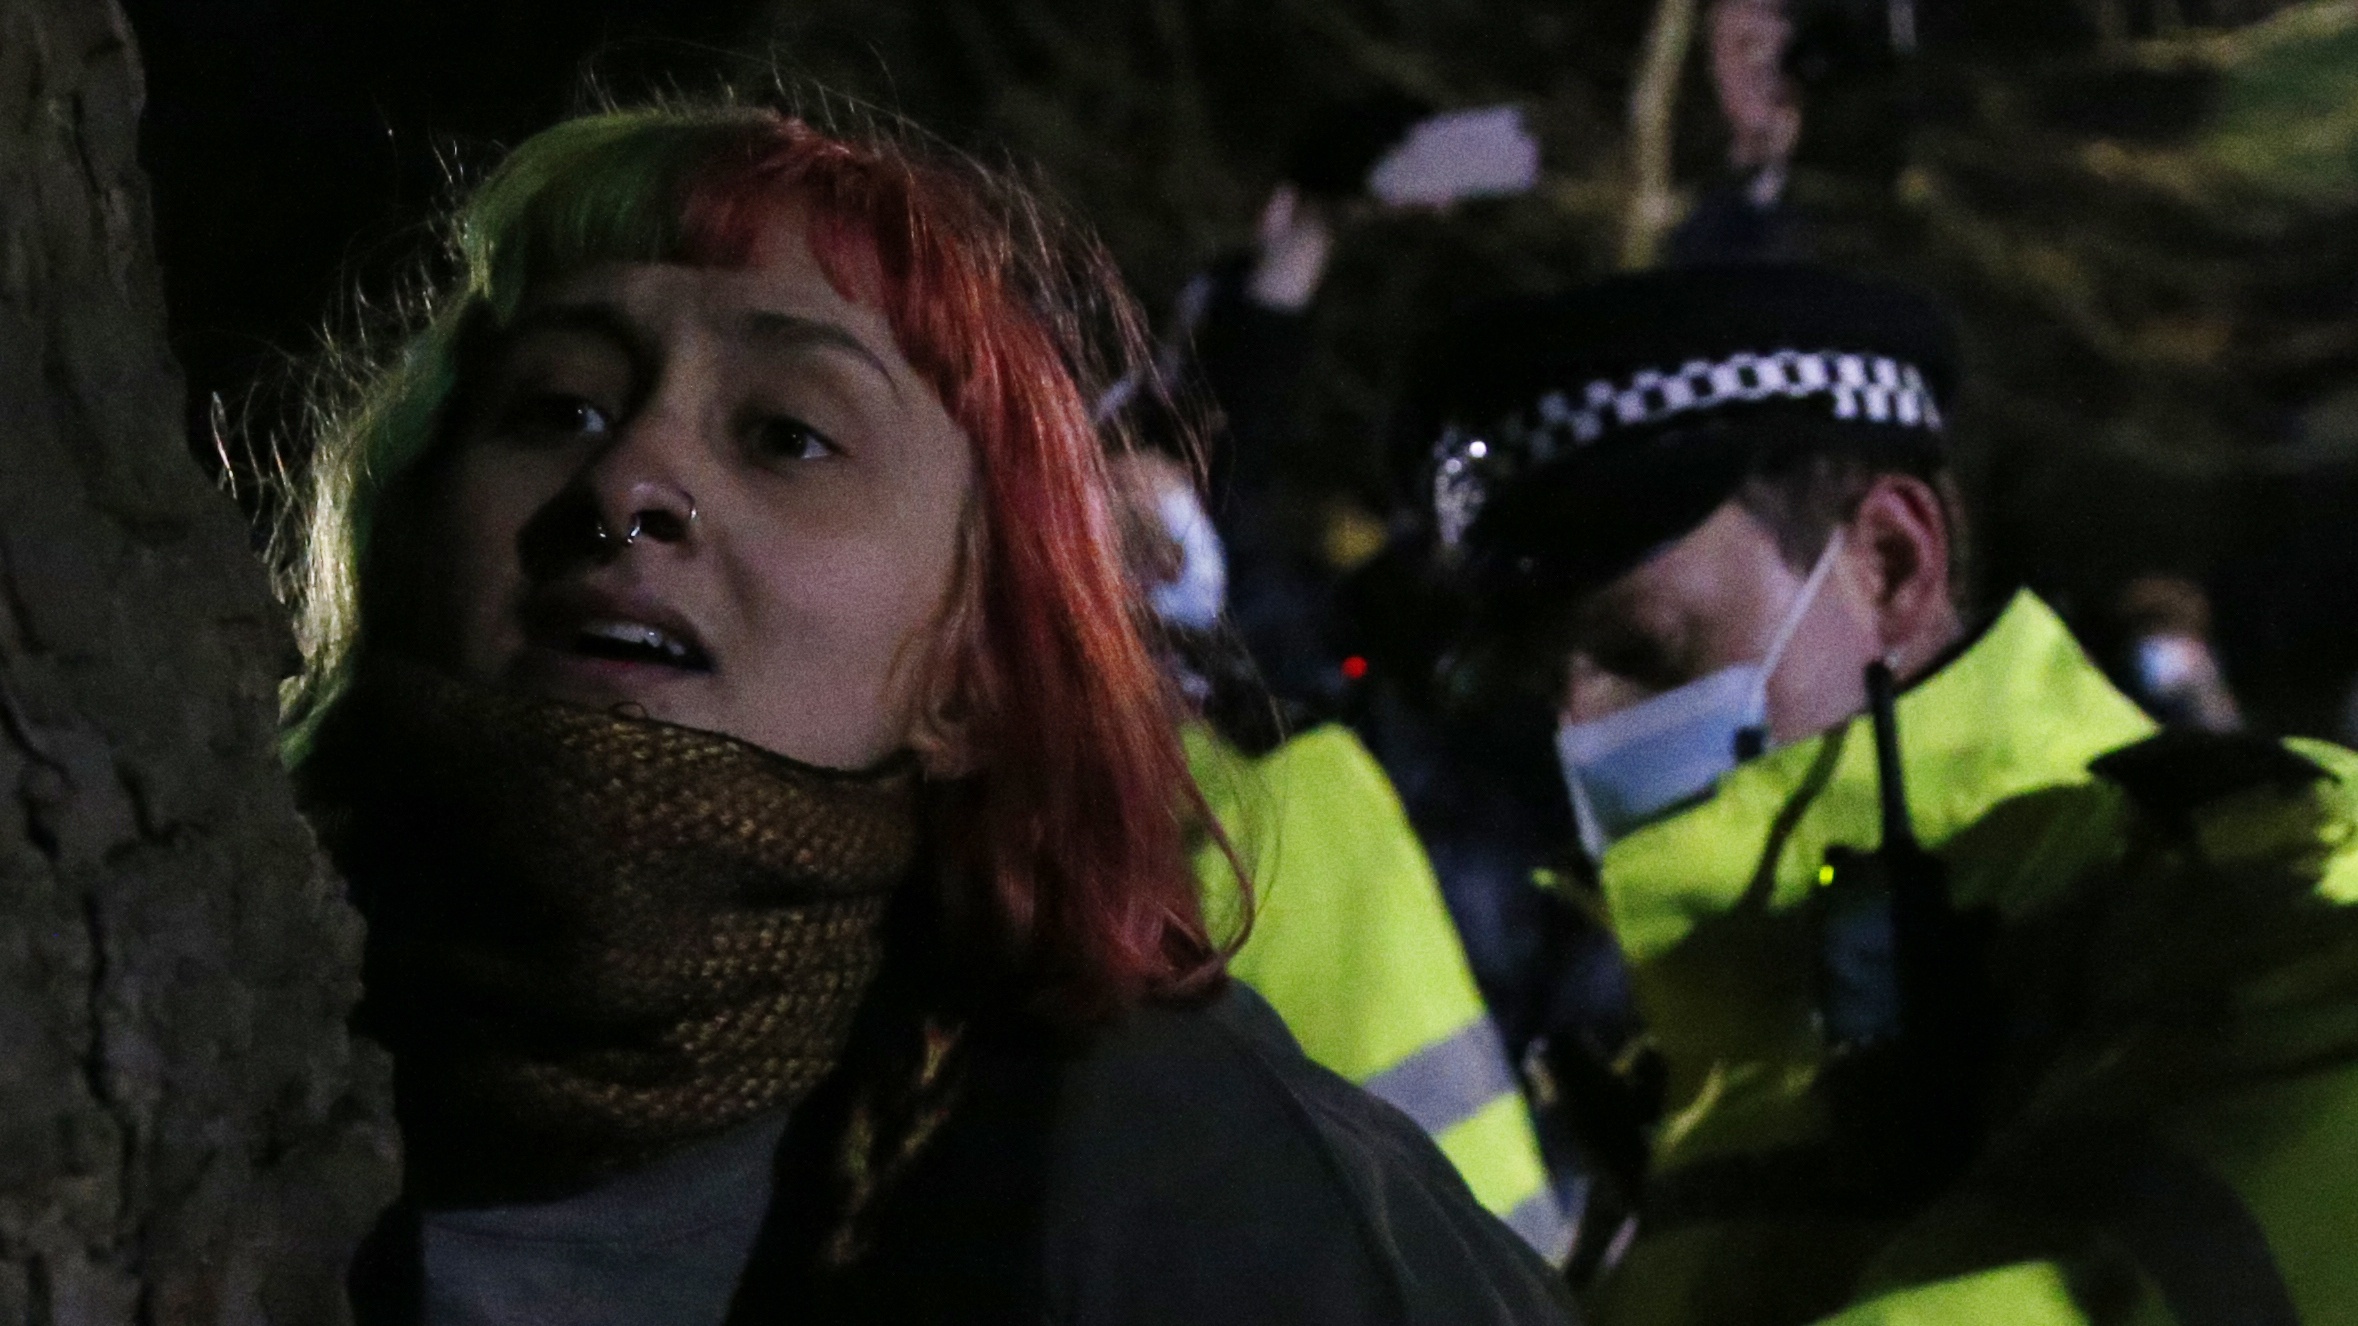 A woman is arrested during the vigil for Sarah Everard